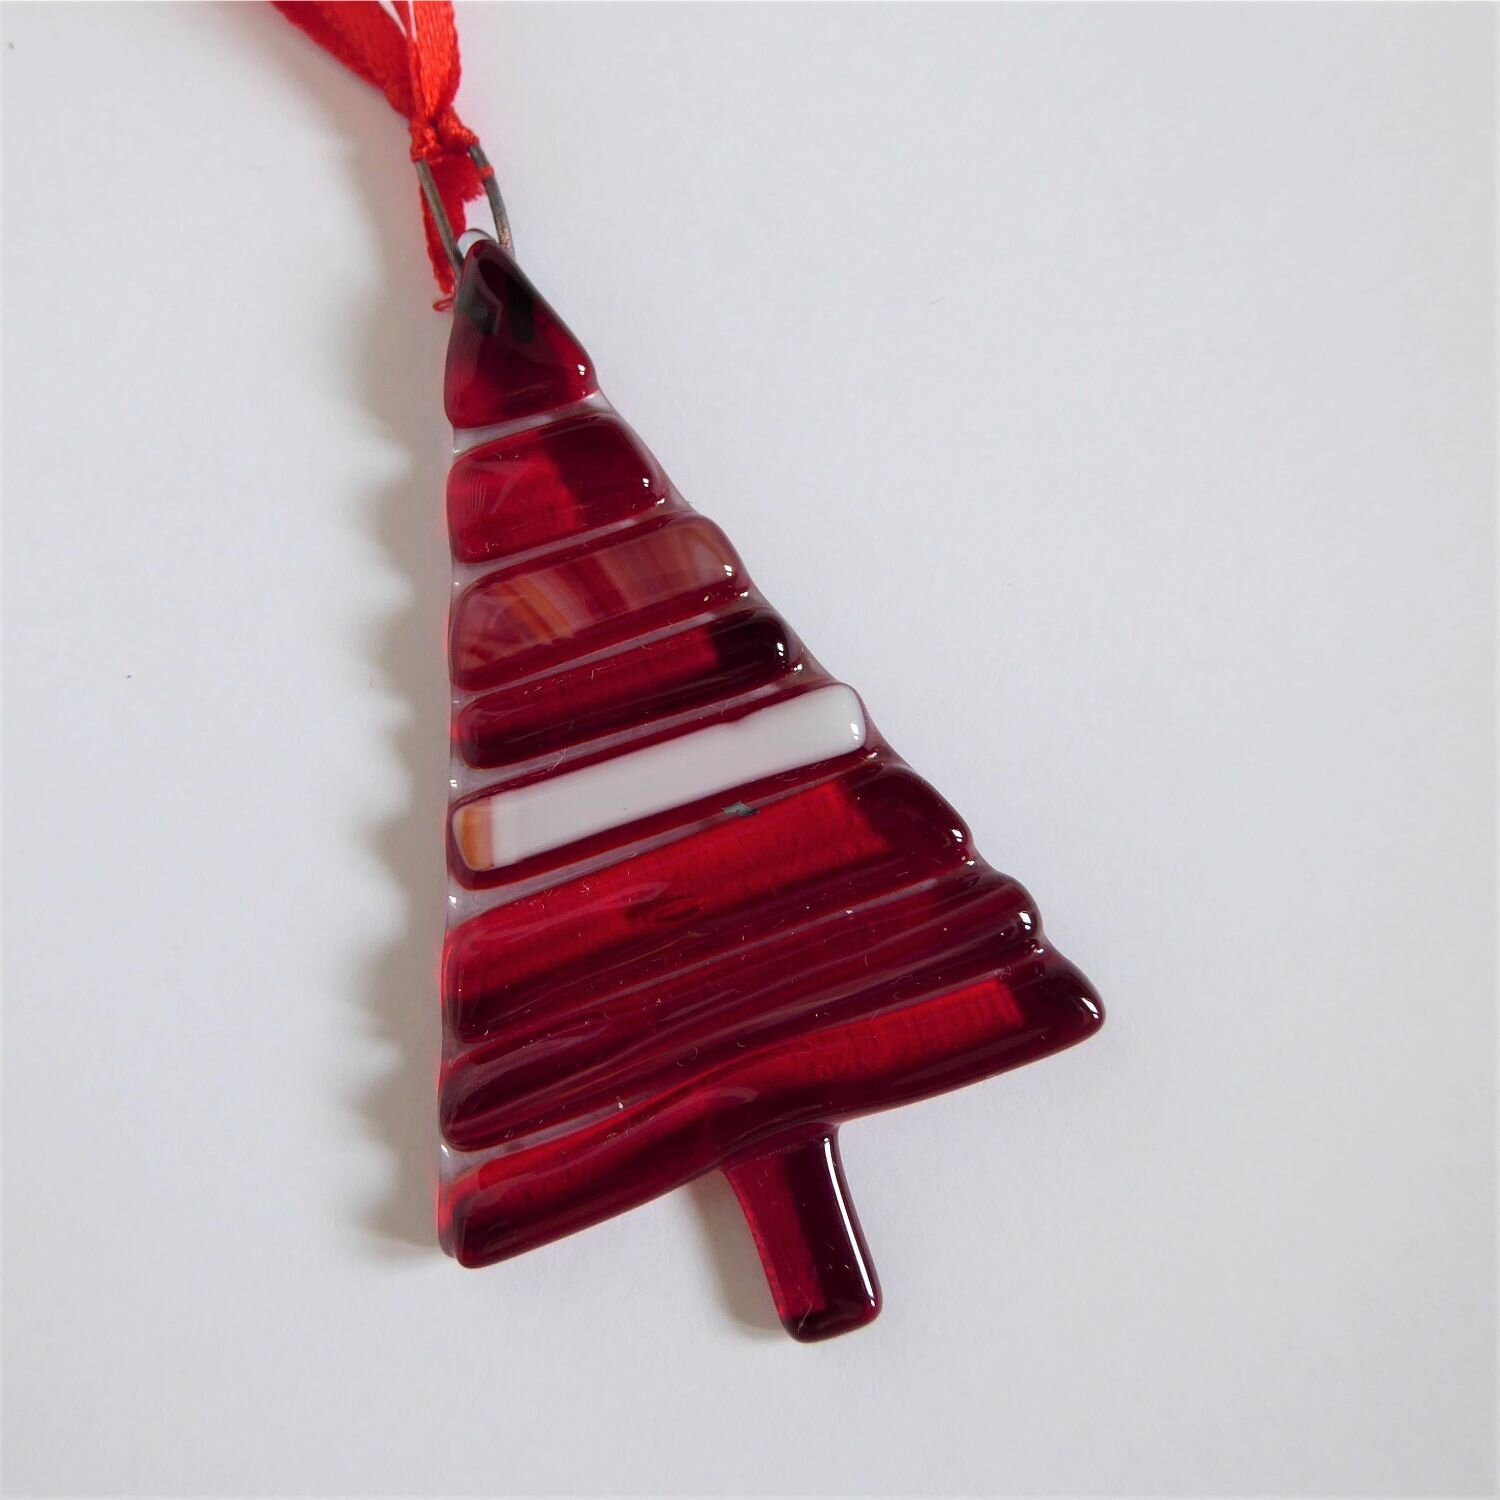  Eva Glass Design fused glass tree-shaped Christmas decoration with red stripes 